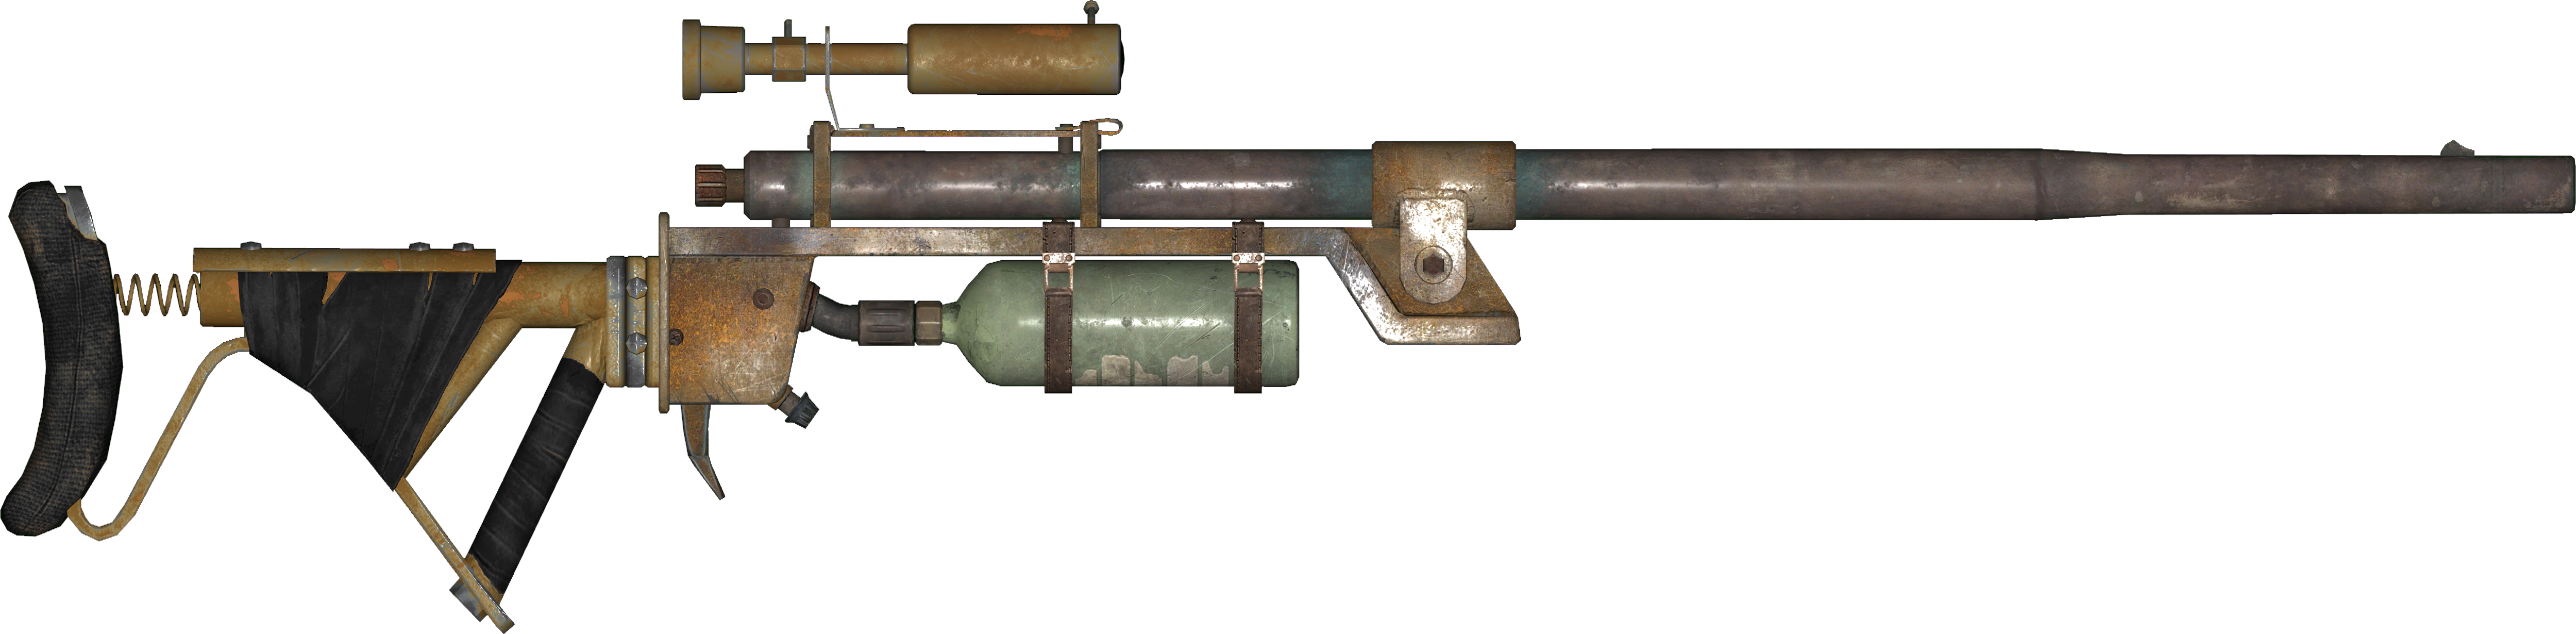 Fallout 4 weapons overhaul фото 102